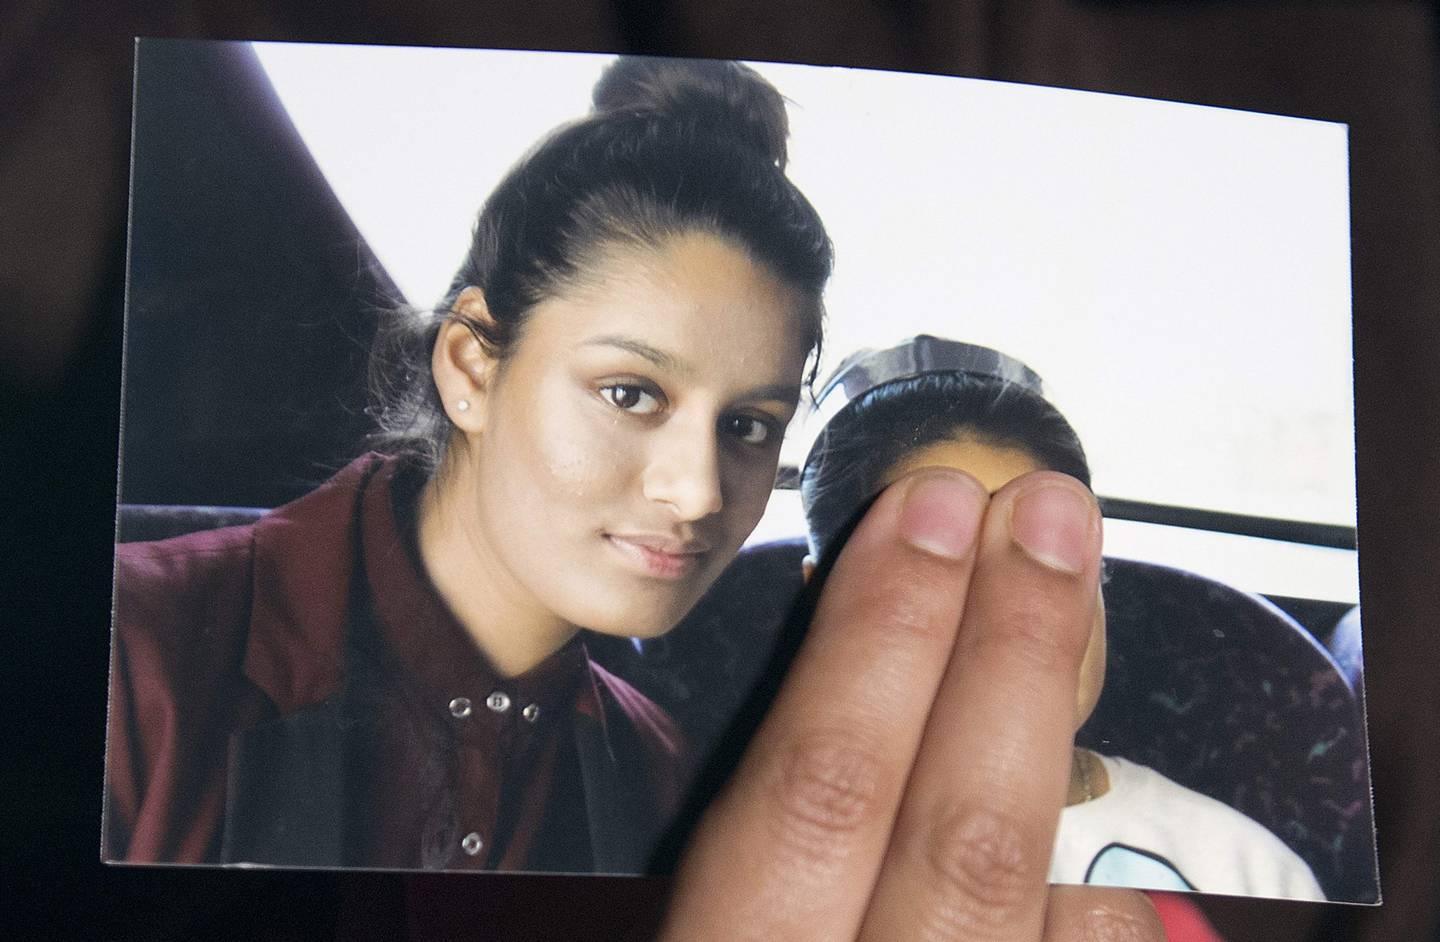 (FILES) In this file photo taken on February 22, 2015, Renu Begum, eldest sister of missing British girl Shamima Begum, holds a picture of her sister while being interviewed by the media in central London. The father of British teenager Shamima Begum, who went to Syria and married an Islamic State militant, insisted in an interview with AFP on February 25, 2019 that Britain must take her back before deciding any punishment. / AFP / POOL / POOL / LAURA LEAN
